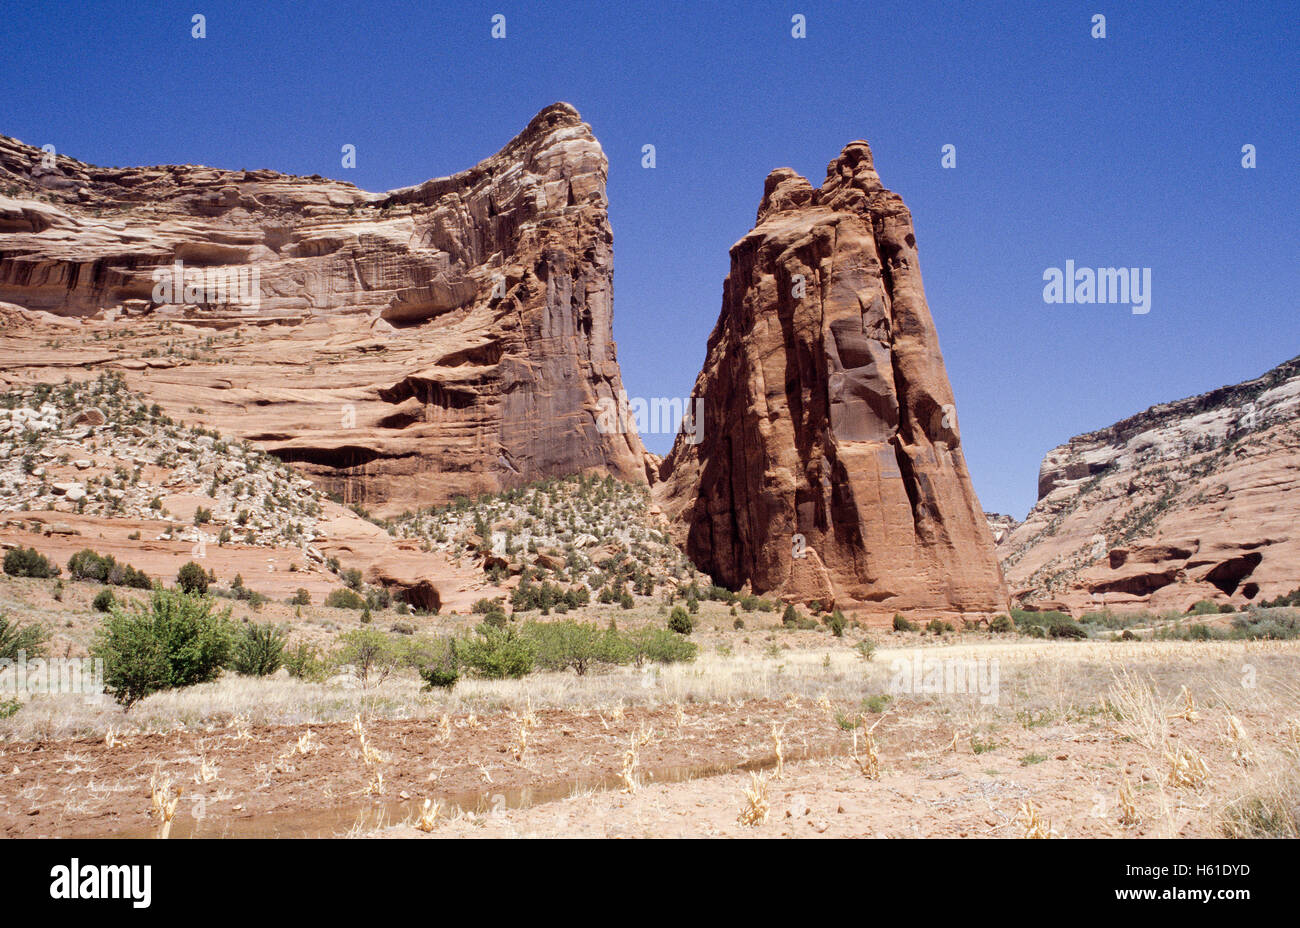 Sandstone cliffs and farmland in Canyon de Chelly National Monument, Arizona Stock Photo